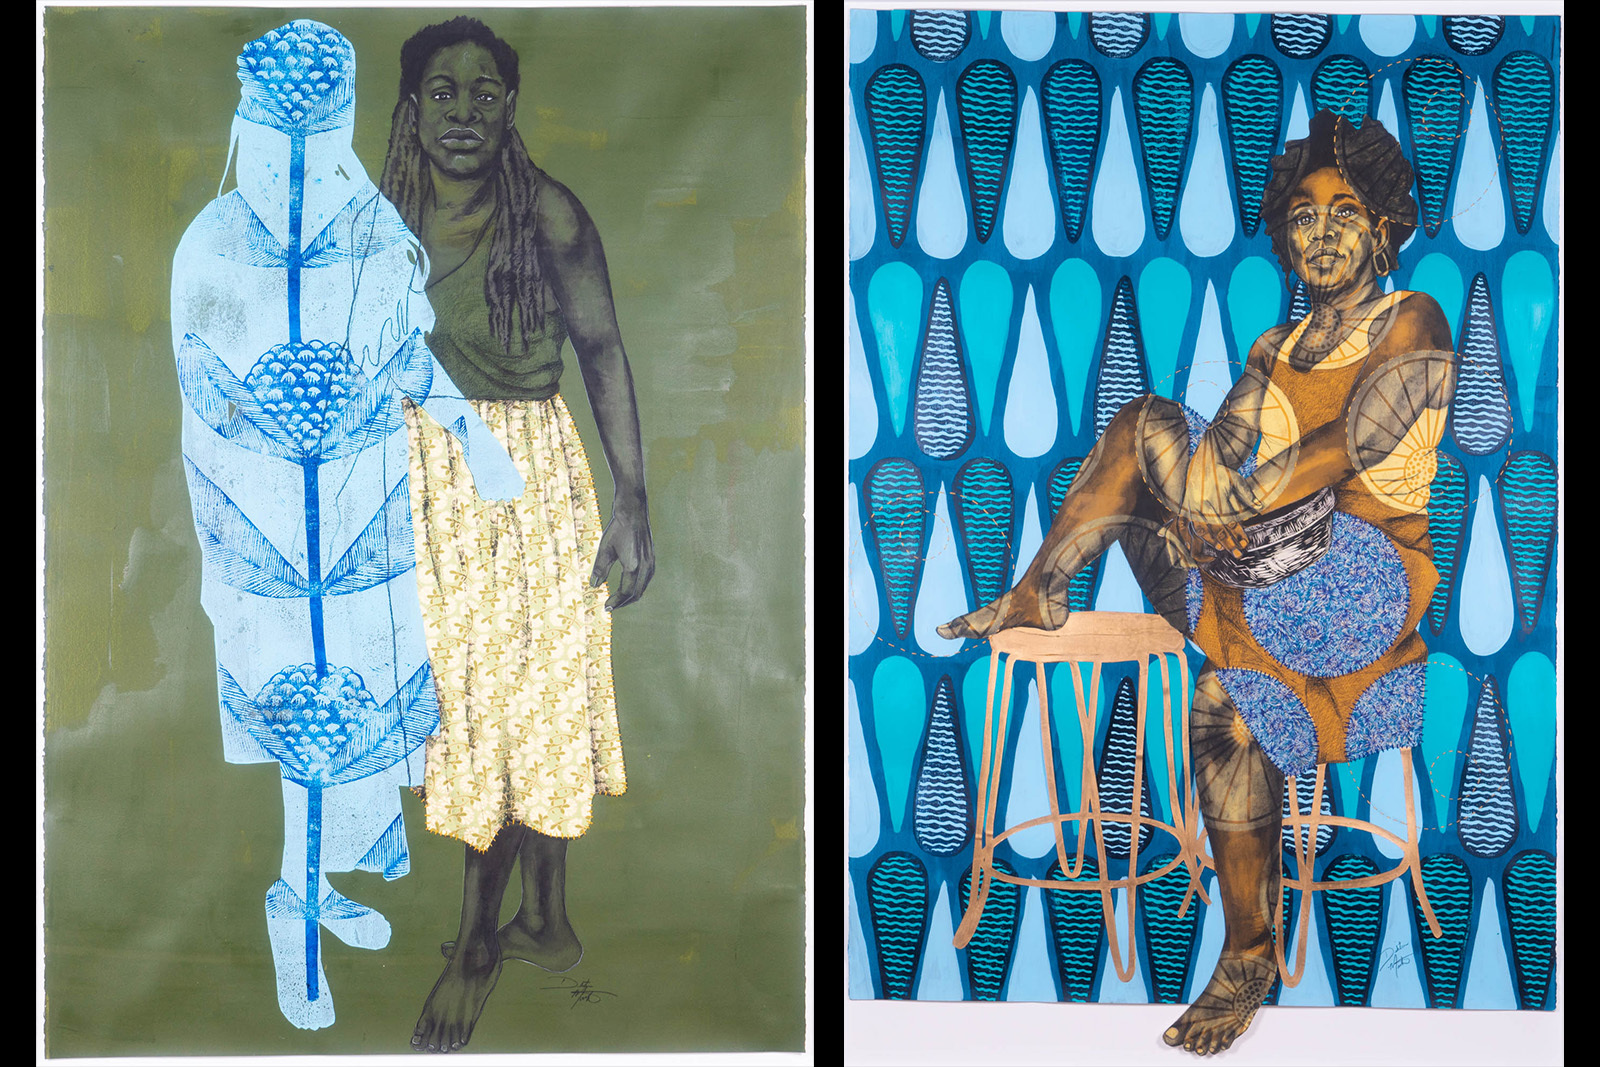 Delita Martin mixed media work first piece companion standing figure and blue silhouette on a green background second piece offerings self portrait sitting figure on a blue tear drop shape pattern background